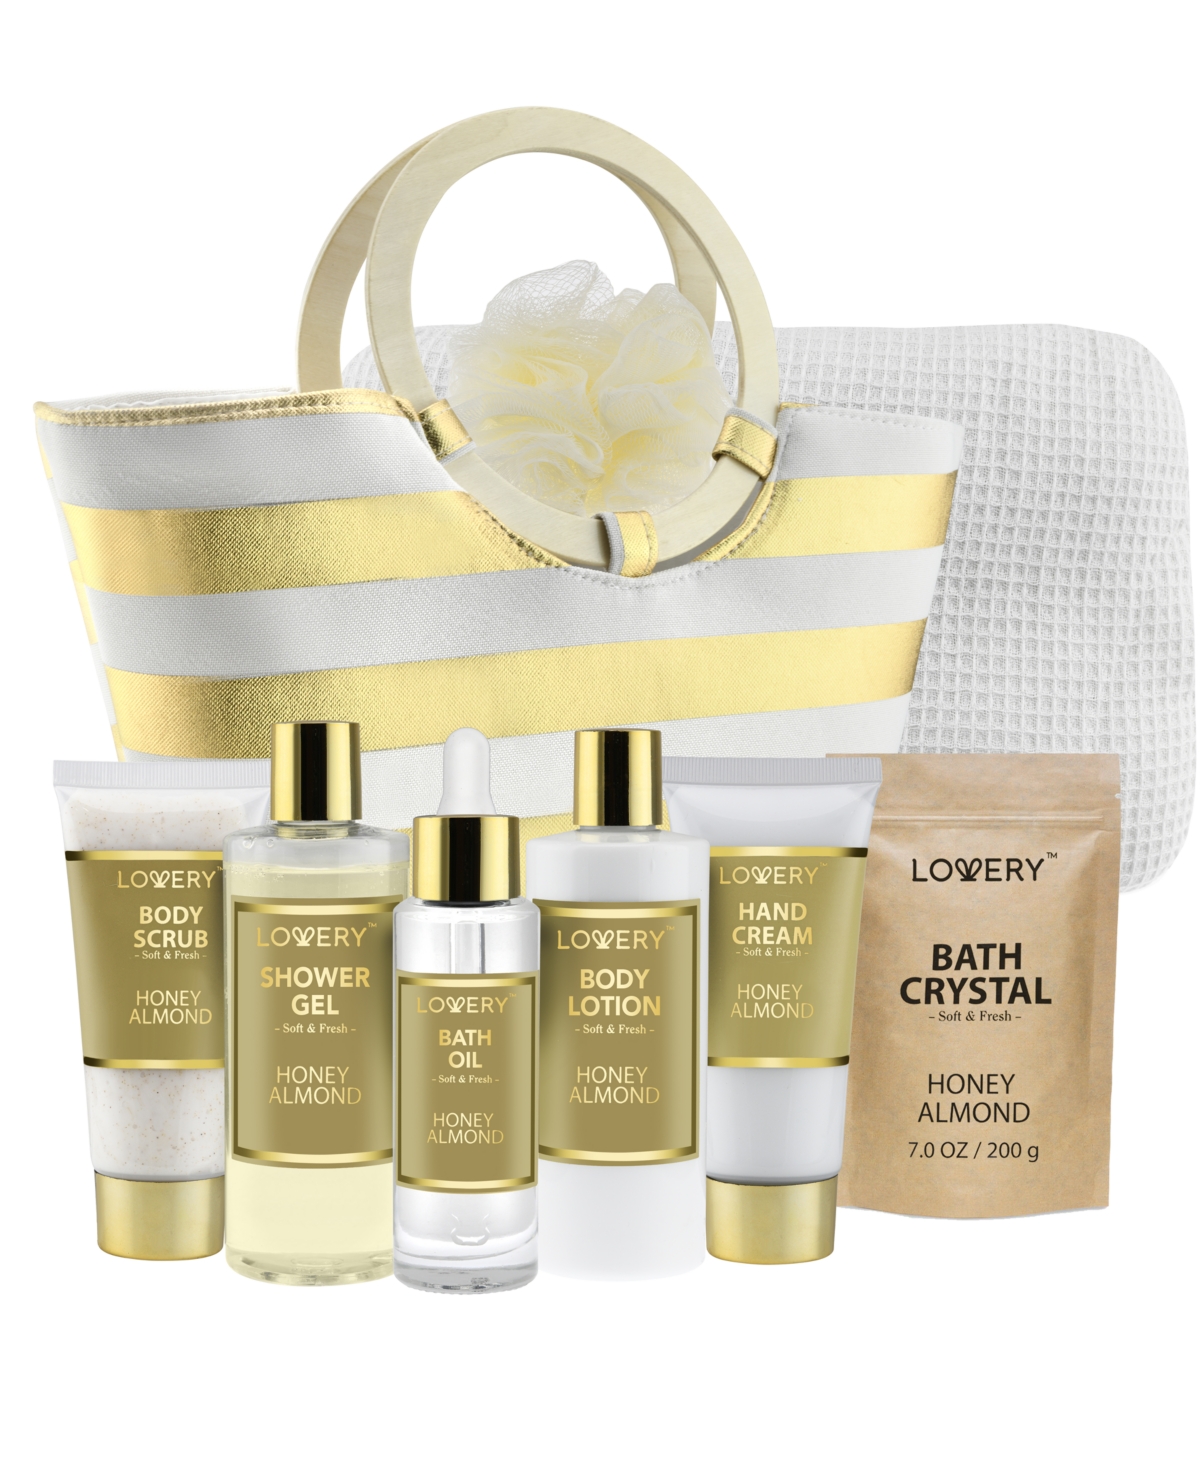 Honey Almond Home Spa Gift Set, Bath and Body Care with Tote Bag, 9 Piece